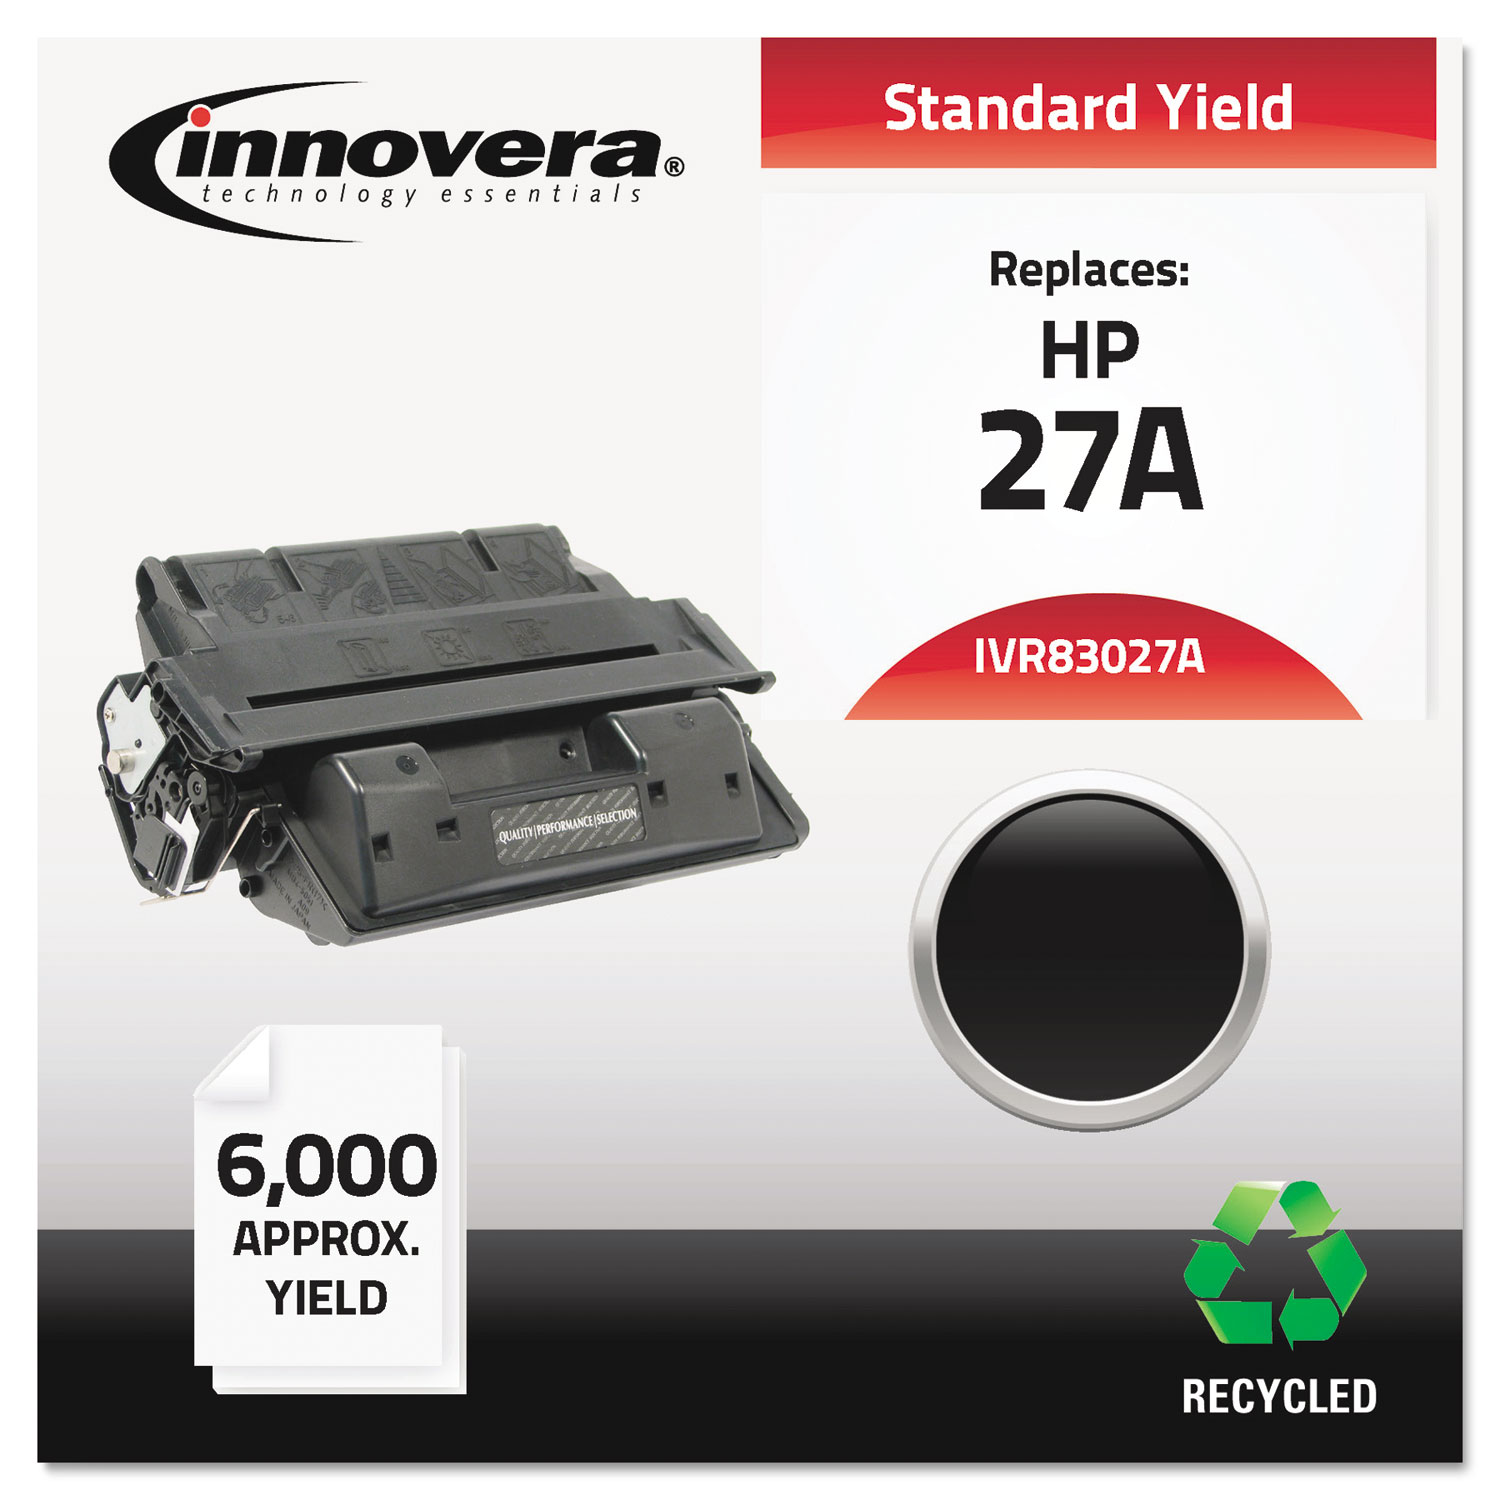  Innovera IVR83027A Remanufactured C4127A (27A) Toner, 6000 Page-Yield, Black (IVR83027A) 